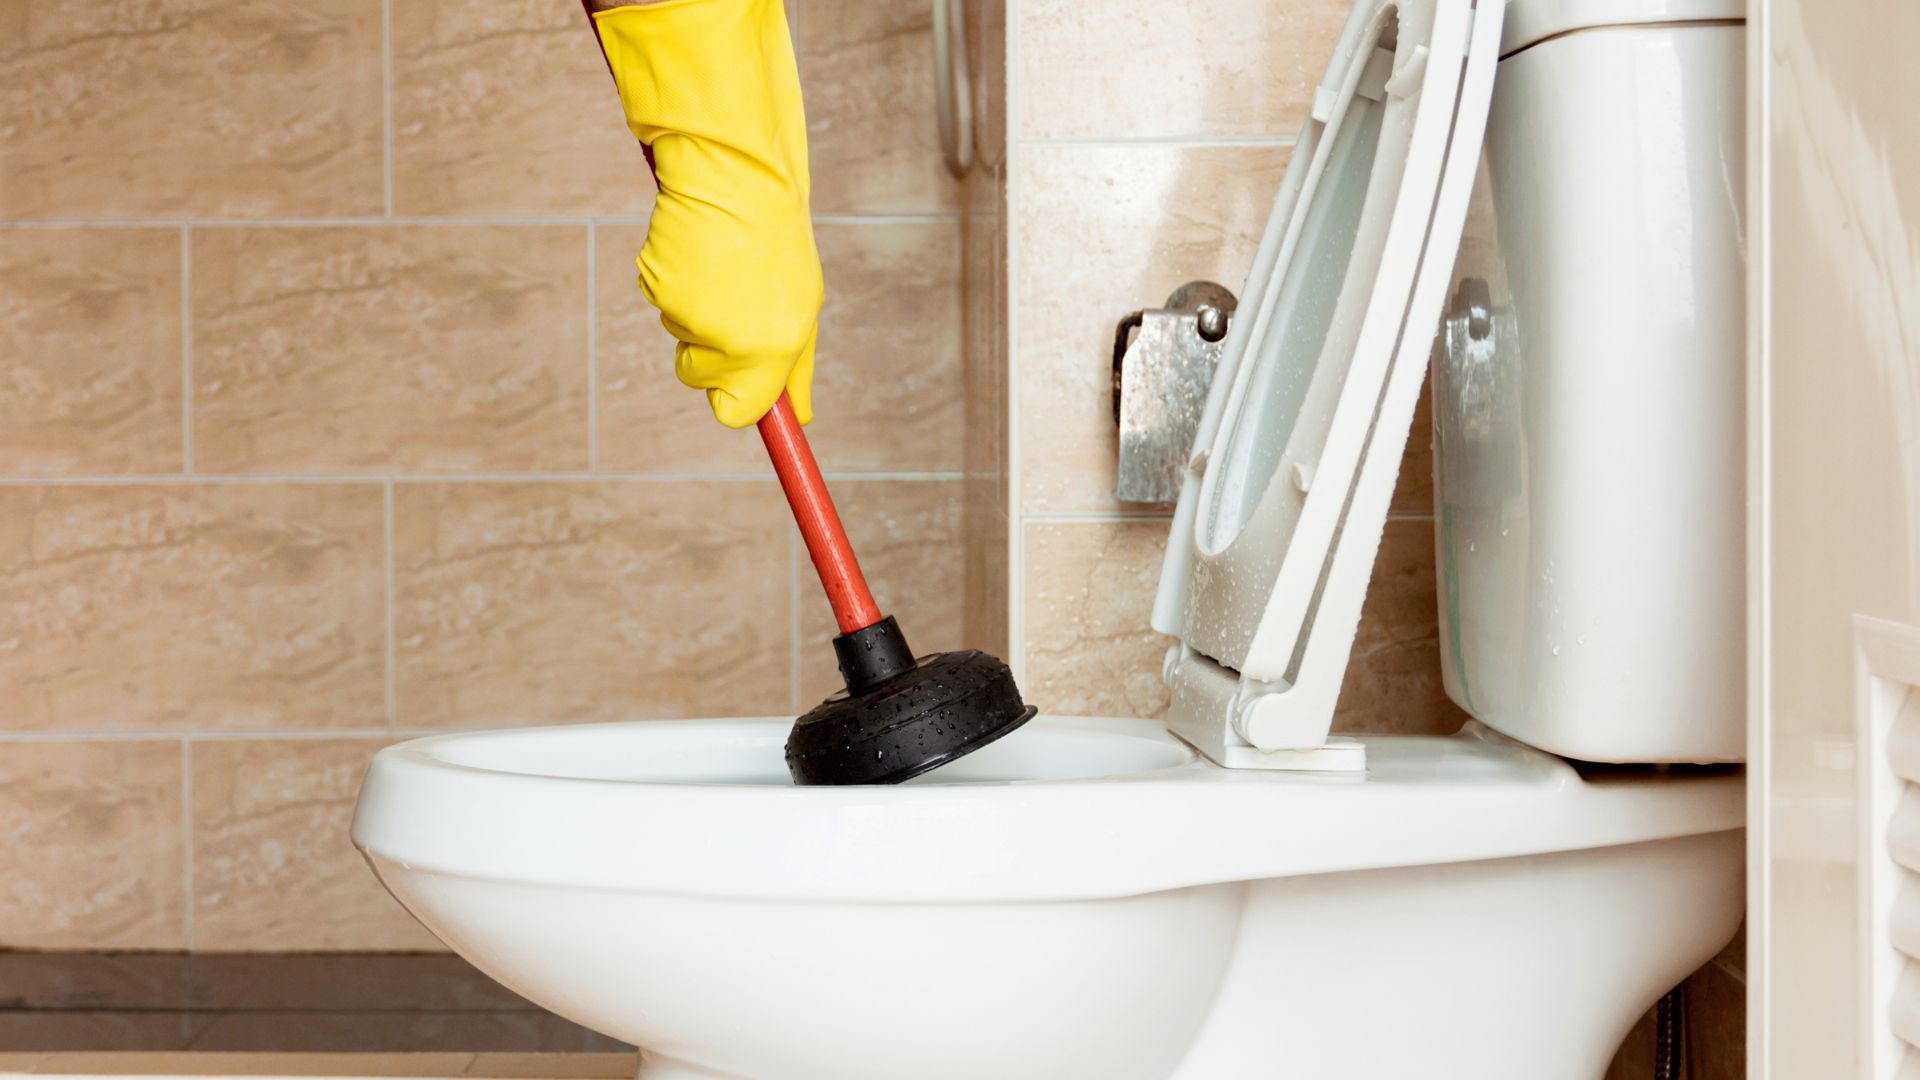 Blocked and Clogged Toilets Fixed by Experienced Plumbers